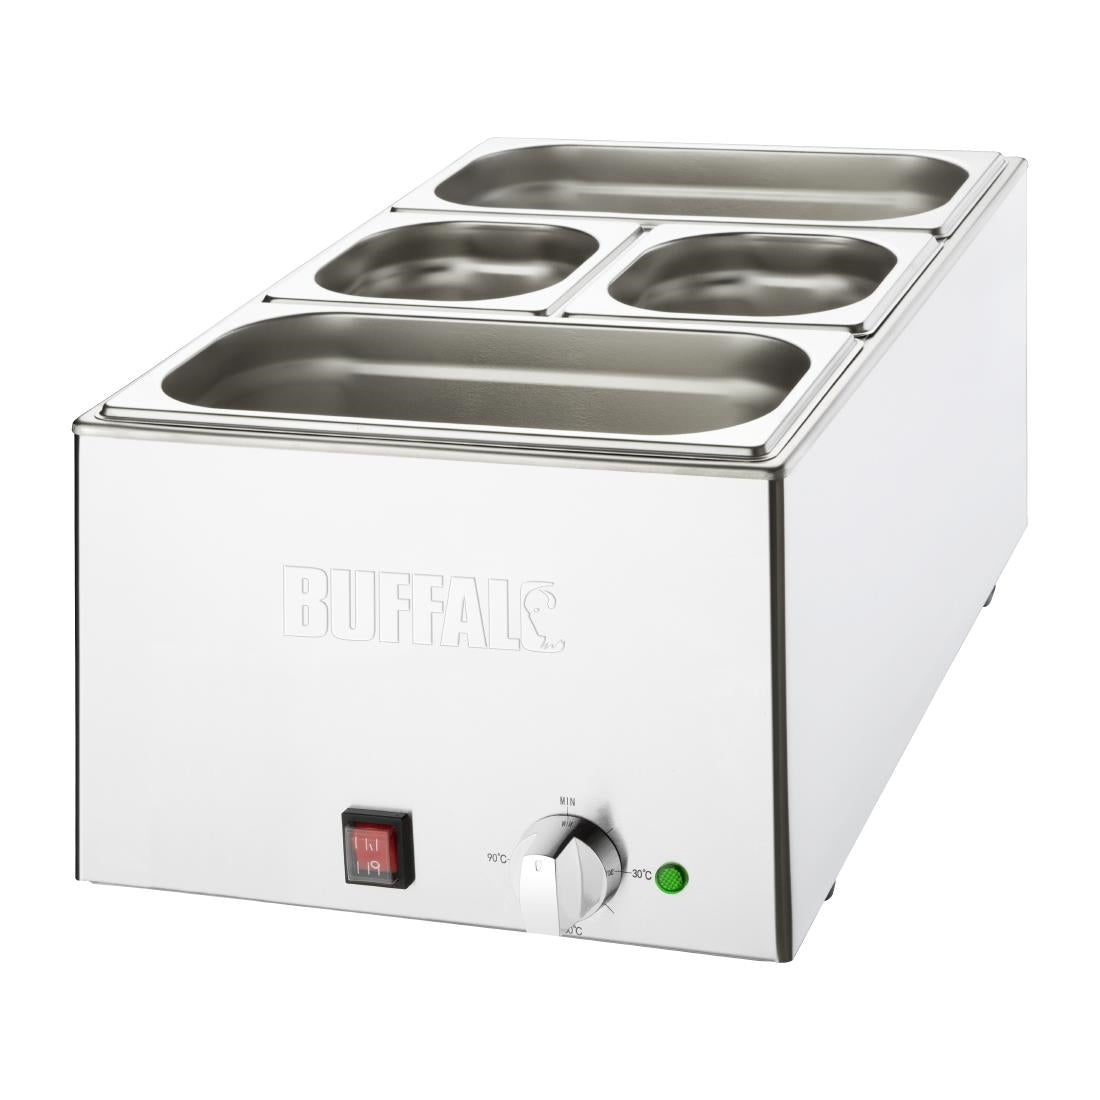 FT691 Buffalo Bain Marie with Pans JD Catering Equipment Solutions Ltd